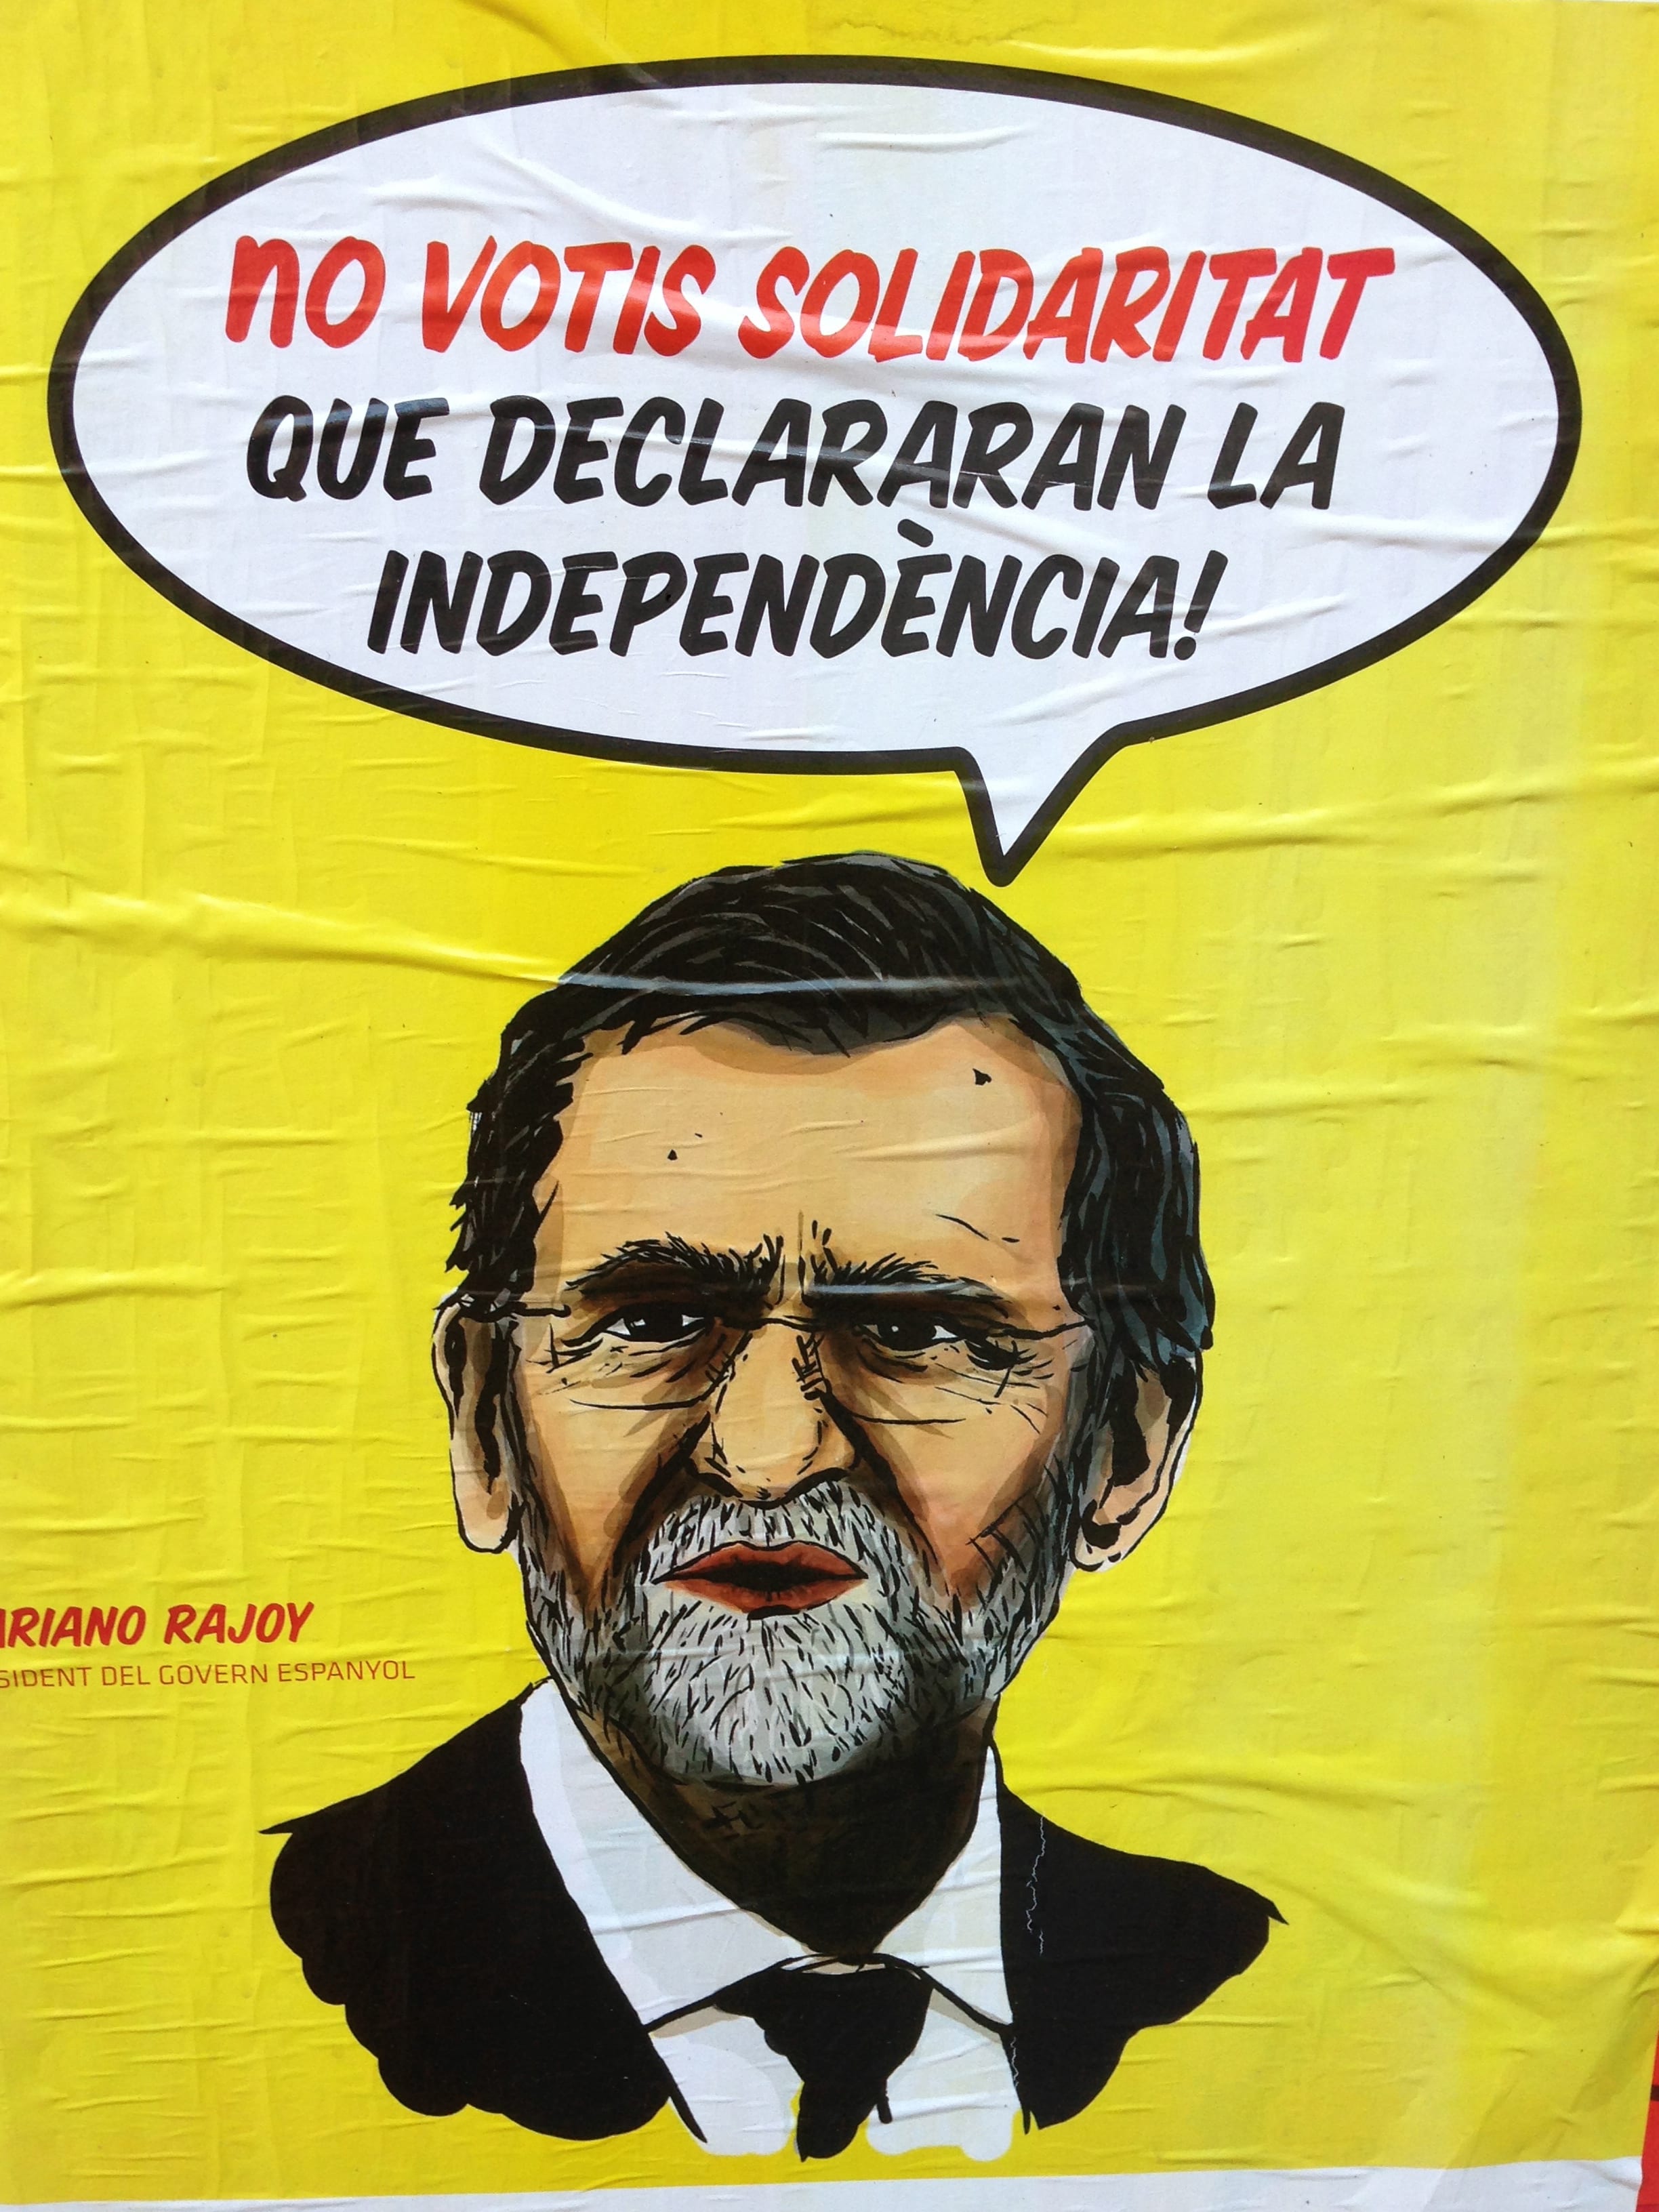 A campaign poster for a hard-line pro-independence party, Solidaritat, still hangs in Barcelona after elections last November. The poster depicts Spanish Prime Minister Mariona Rajoy -- who opposes Catalan independence and is unpopular in Catalonia -- saying, ‘Don’t Vote for Solidaritat, because they will declare independence!’